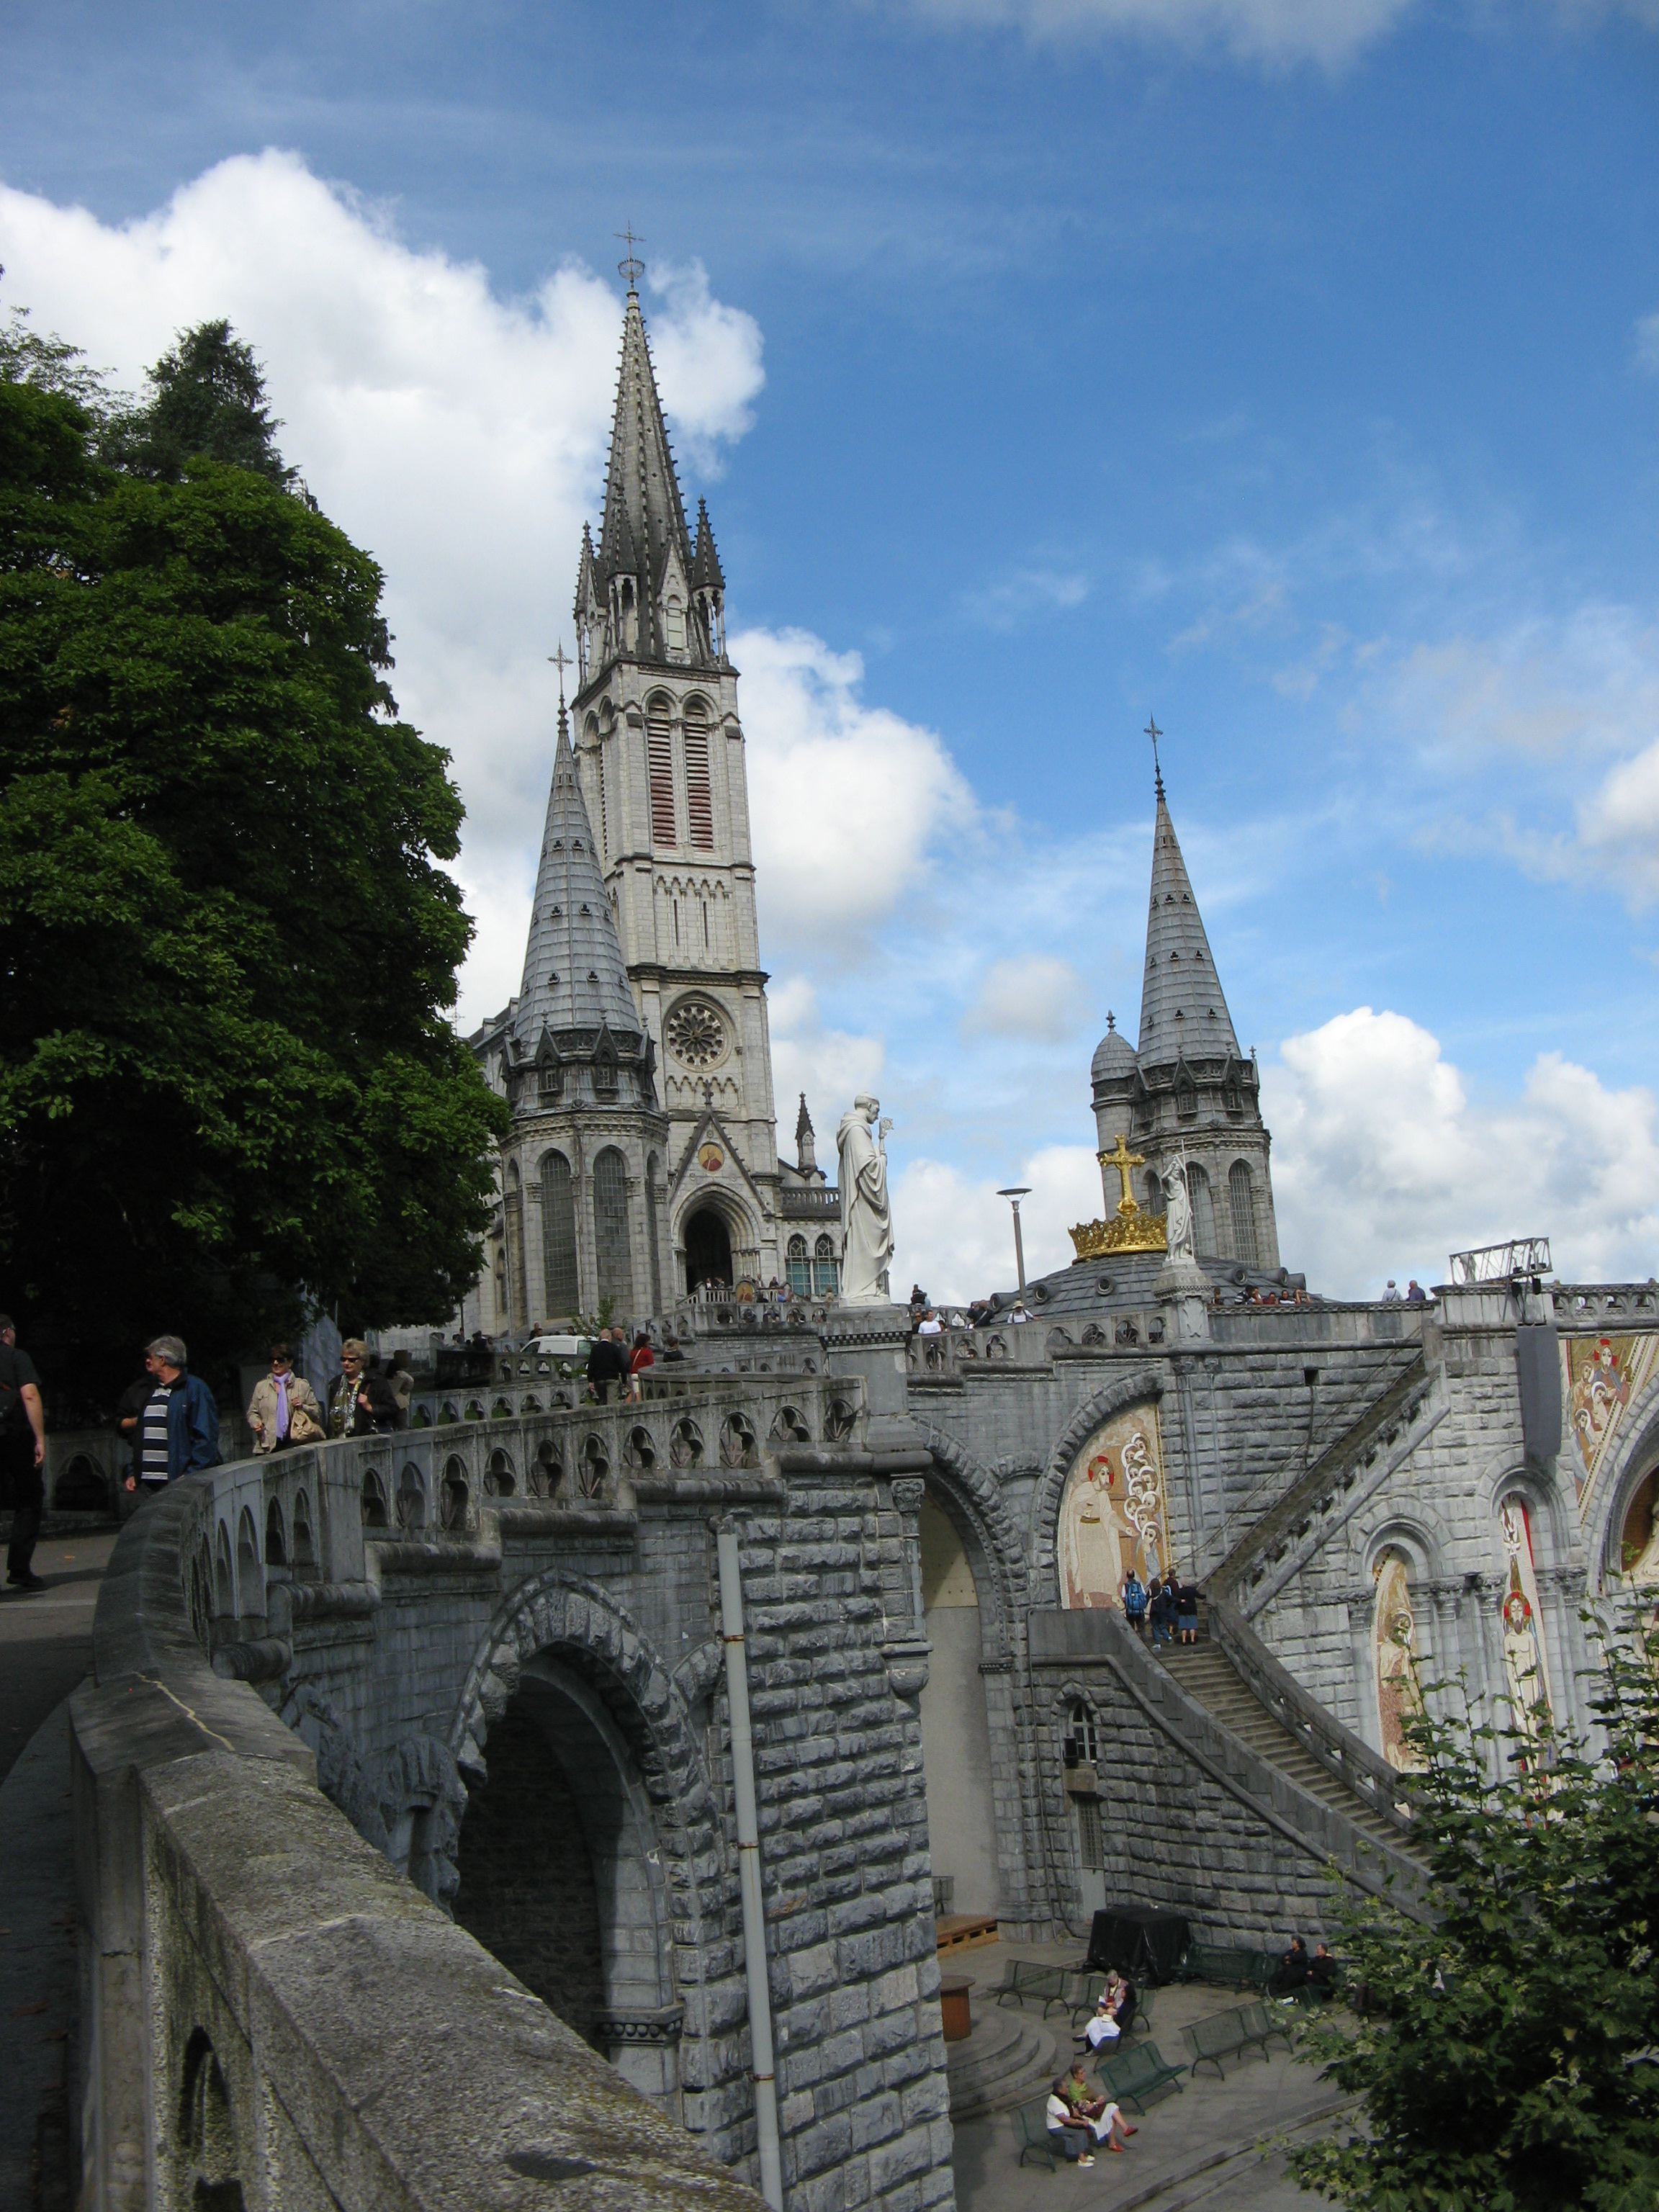 My Pictures of Lourdes